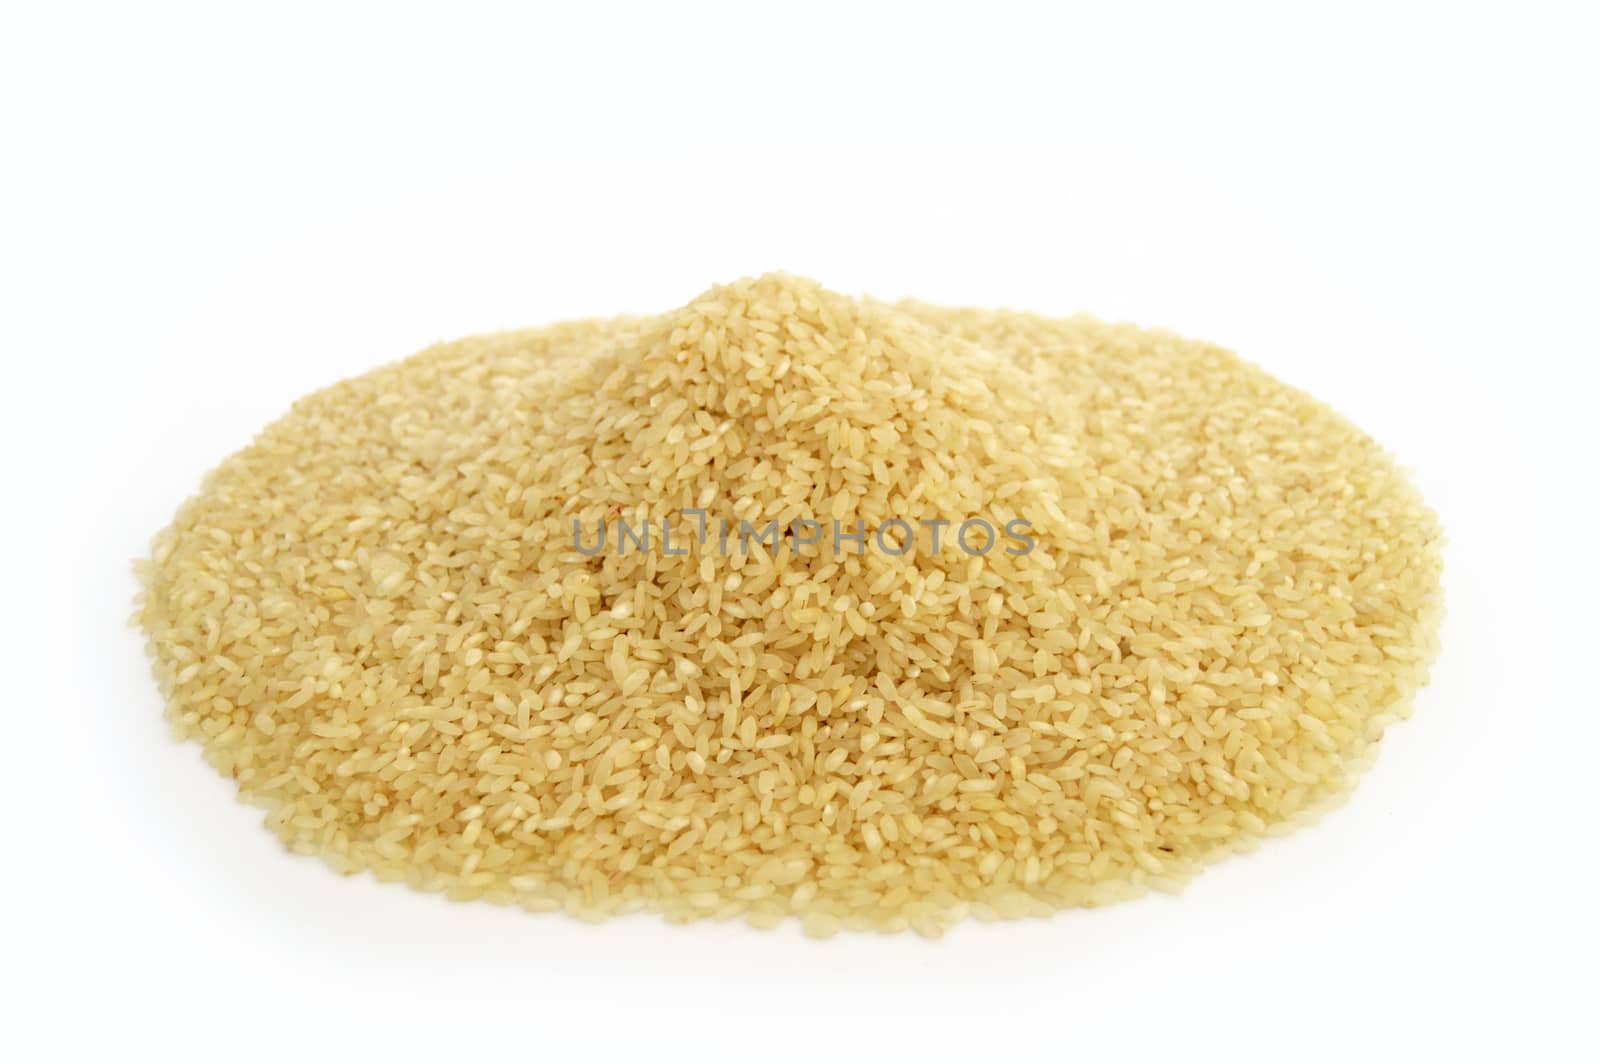 Baldo big rice pictures on the most beautiful and best white background